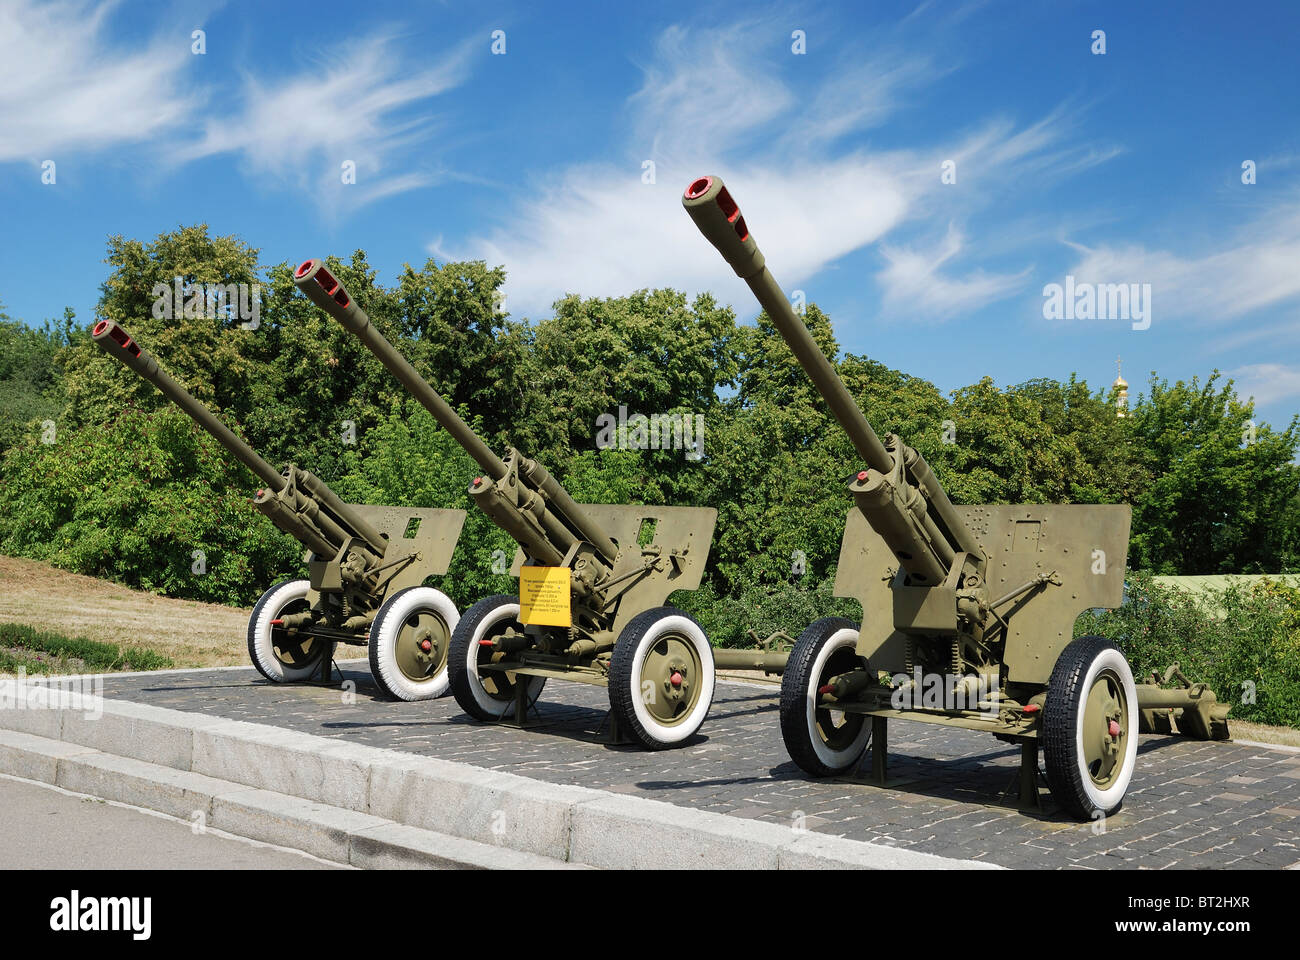 Cannons of the World War II against peaceable landscape Stock Photo